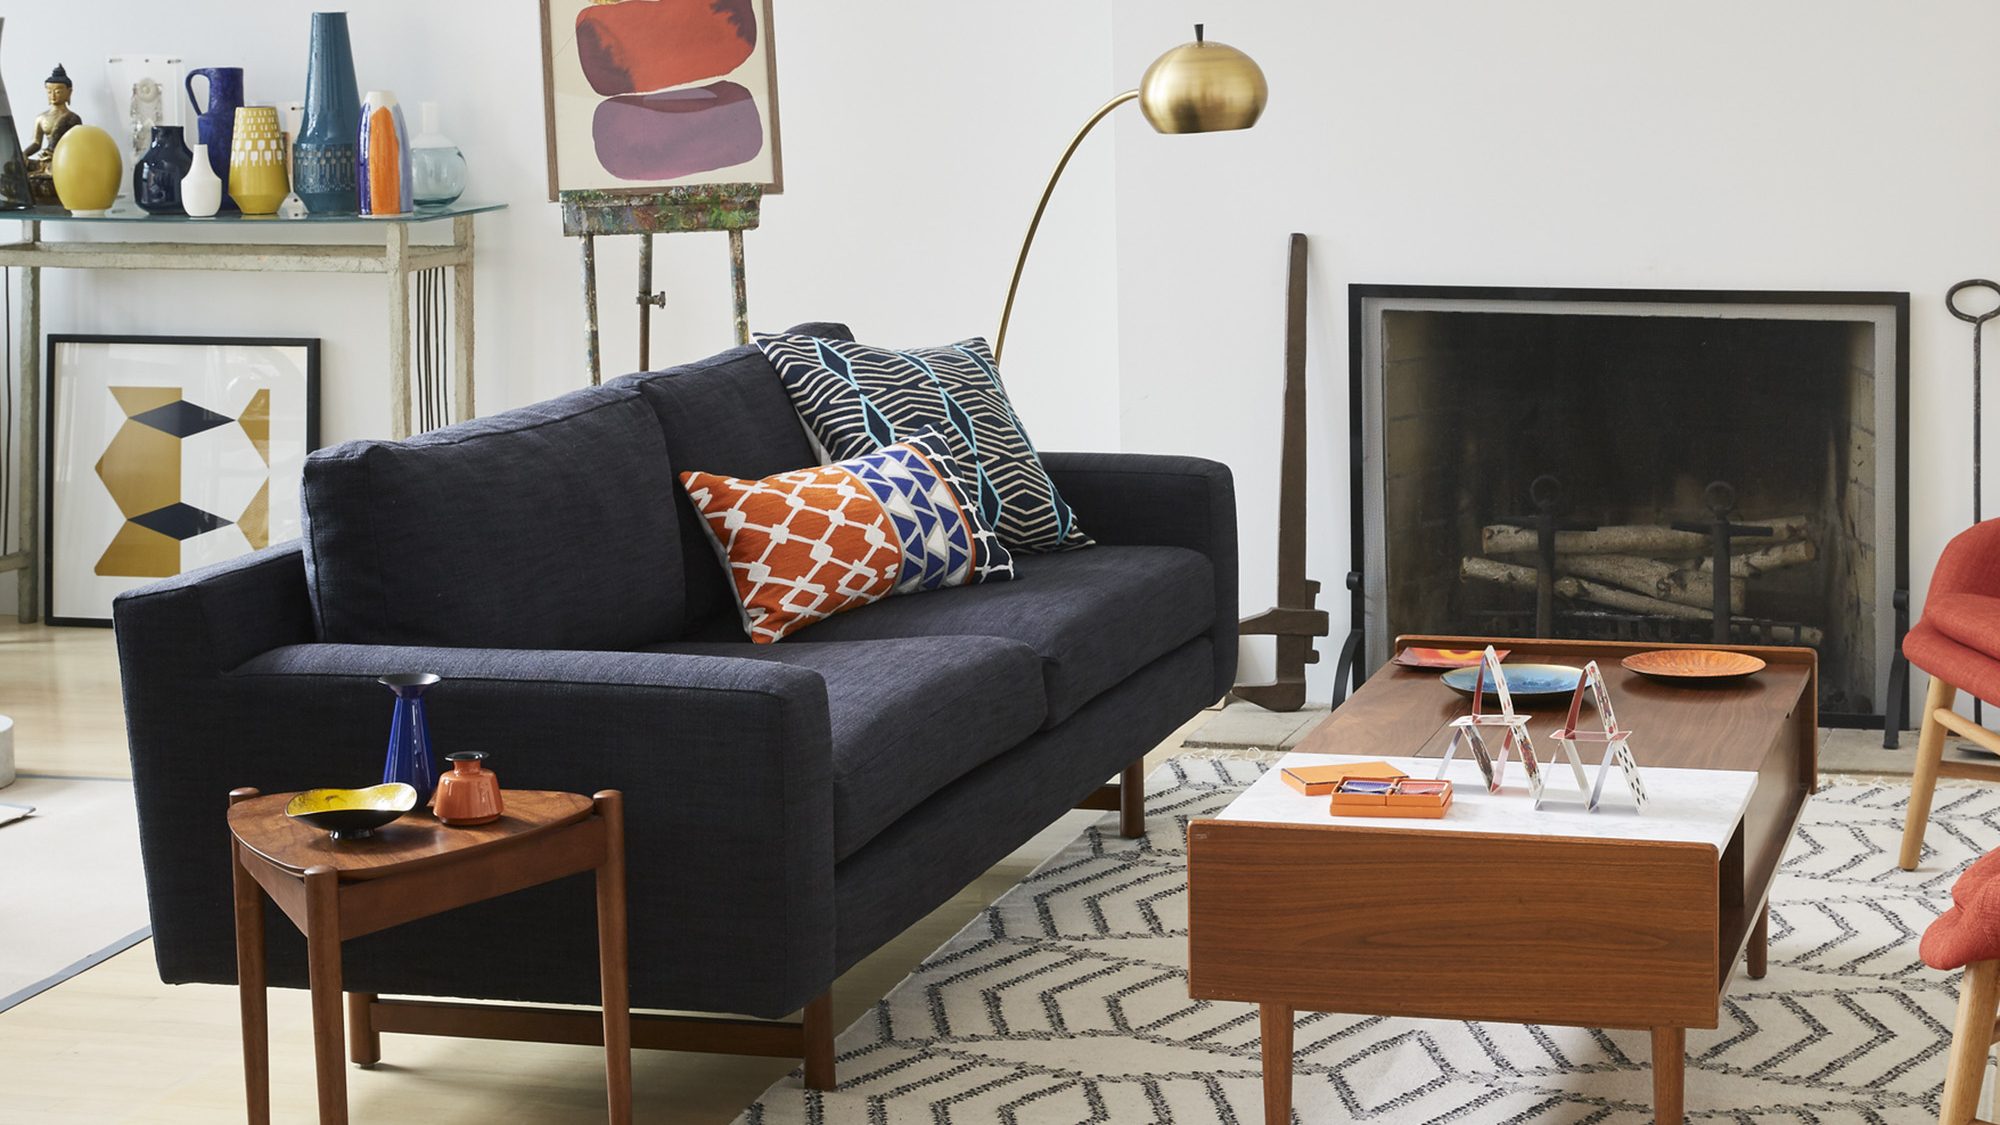 How to pick the perfect sofa for your space